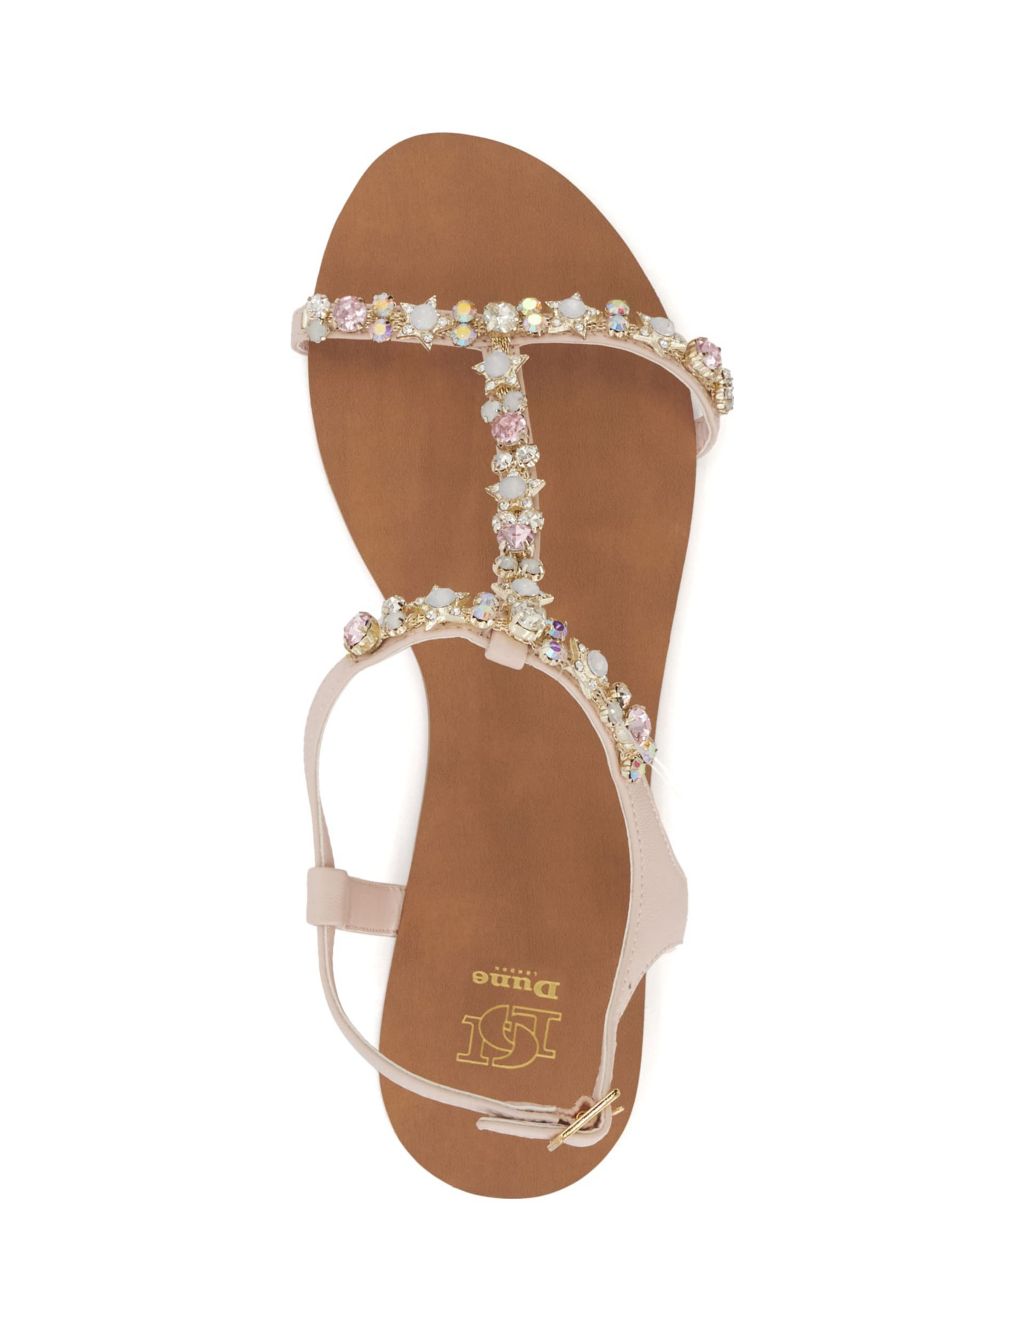 Jewelled Strappy Flat Sandals image 3